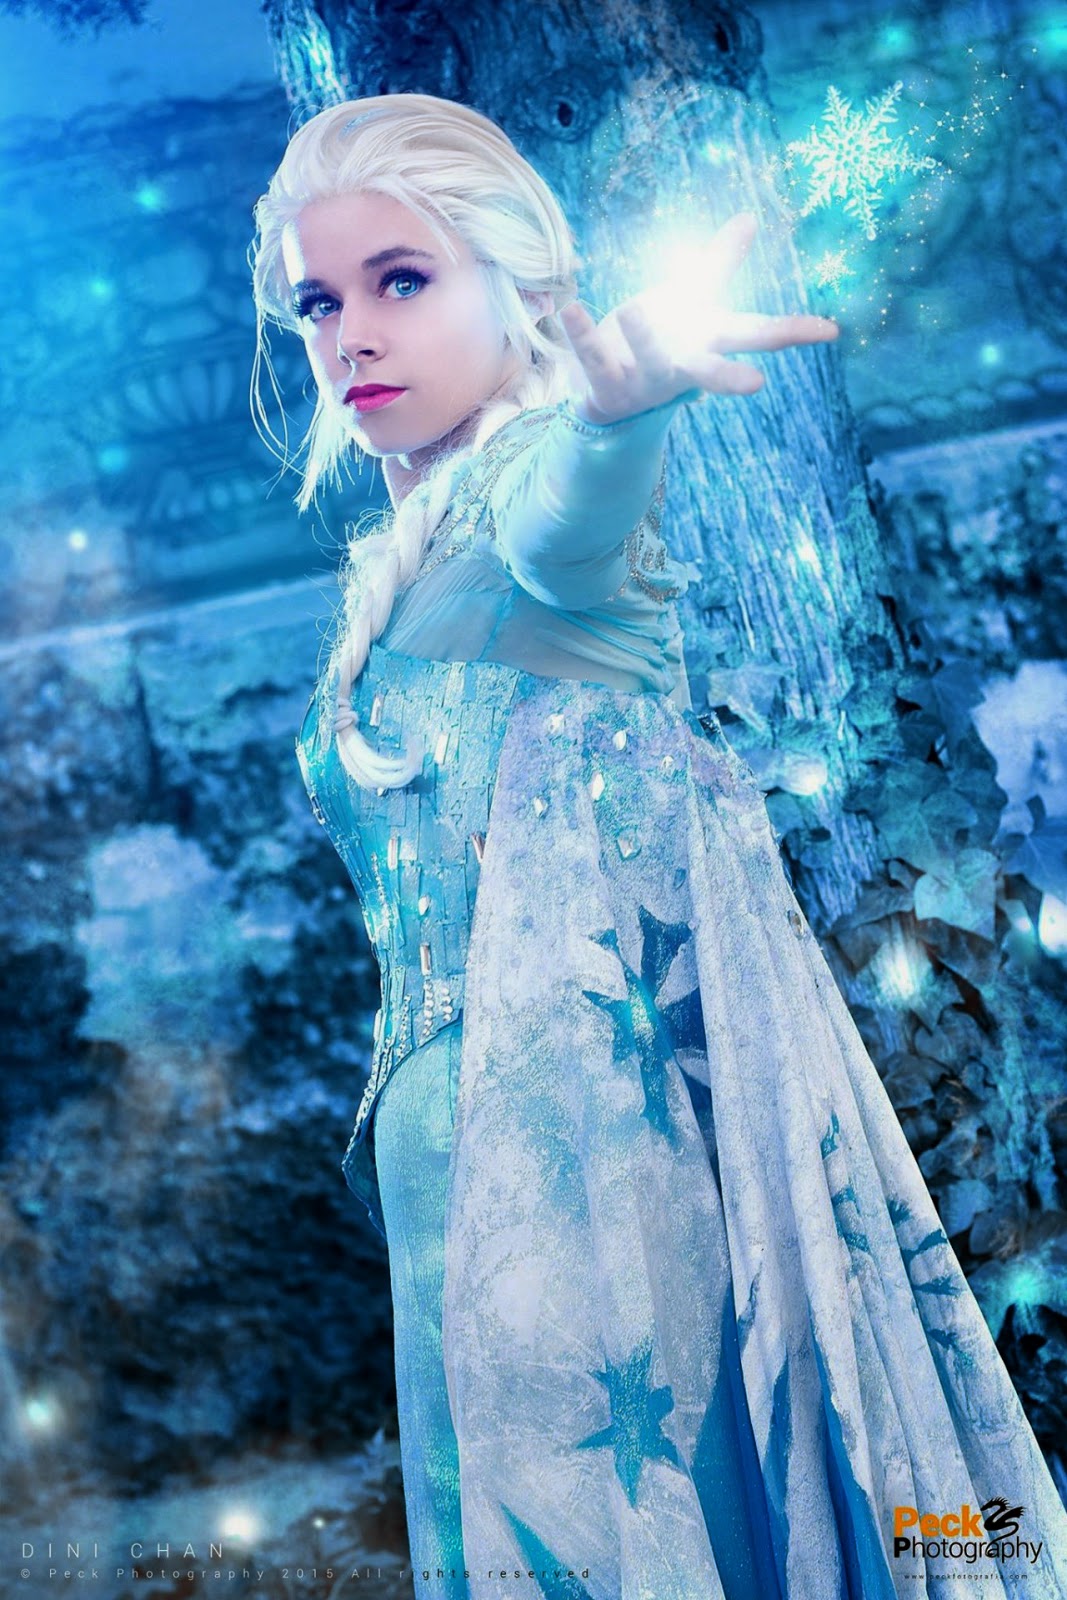 (Psst: DinyChan posted several shots documenting the making of her Elsa cos...